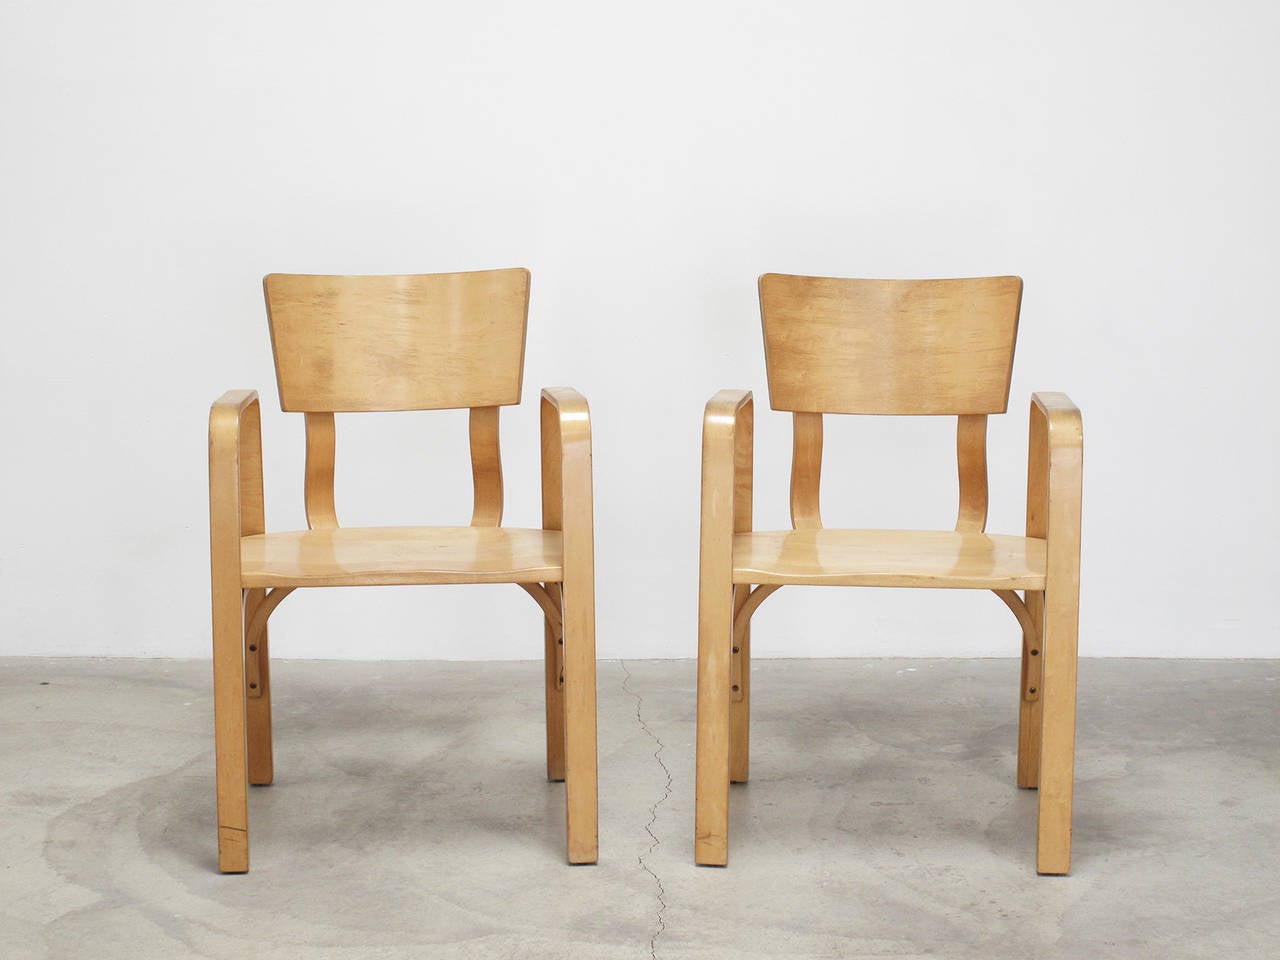 Vintage Thonet armchairs, molded birch plywood, 1950s, New York, NY, dimensions in inches: 33.25 high x 22 wide x 20.25 deep x 17.75 seat height, condition: good vintage